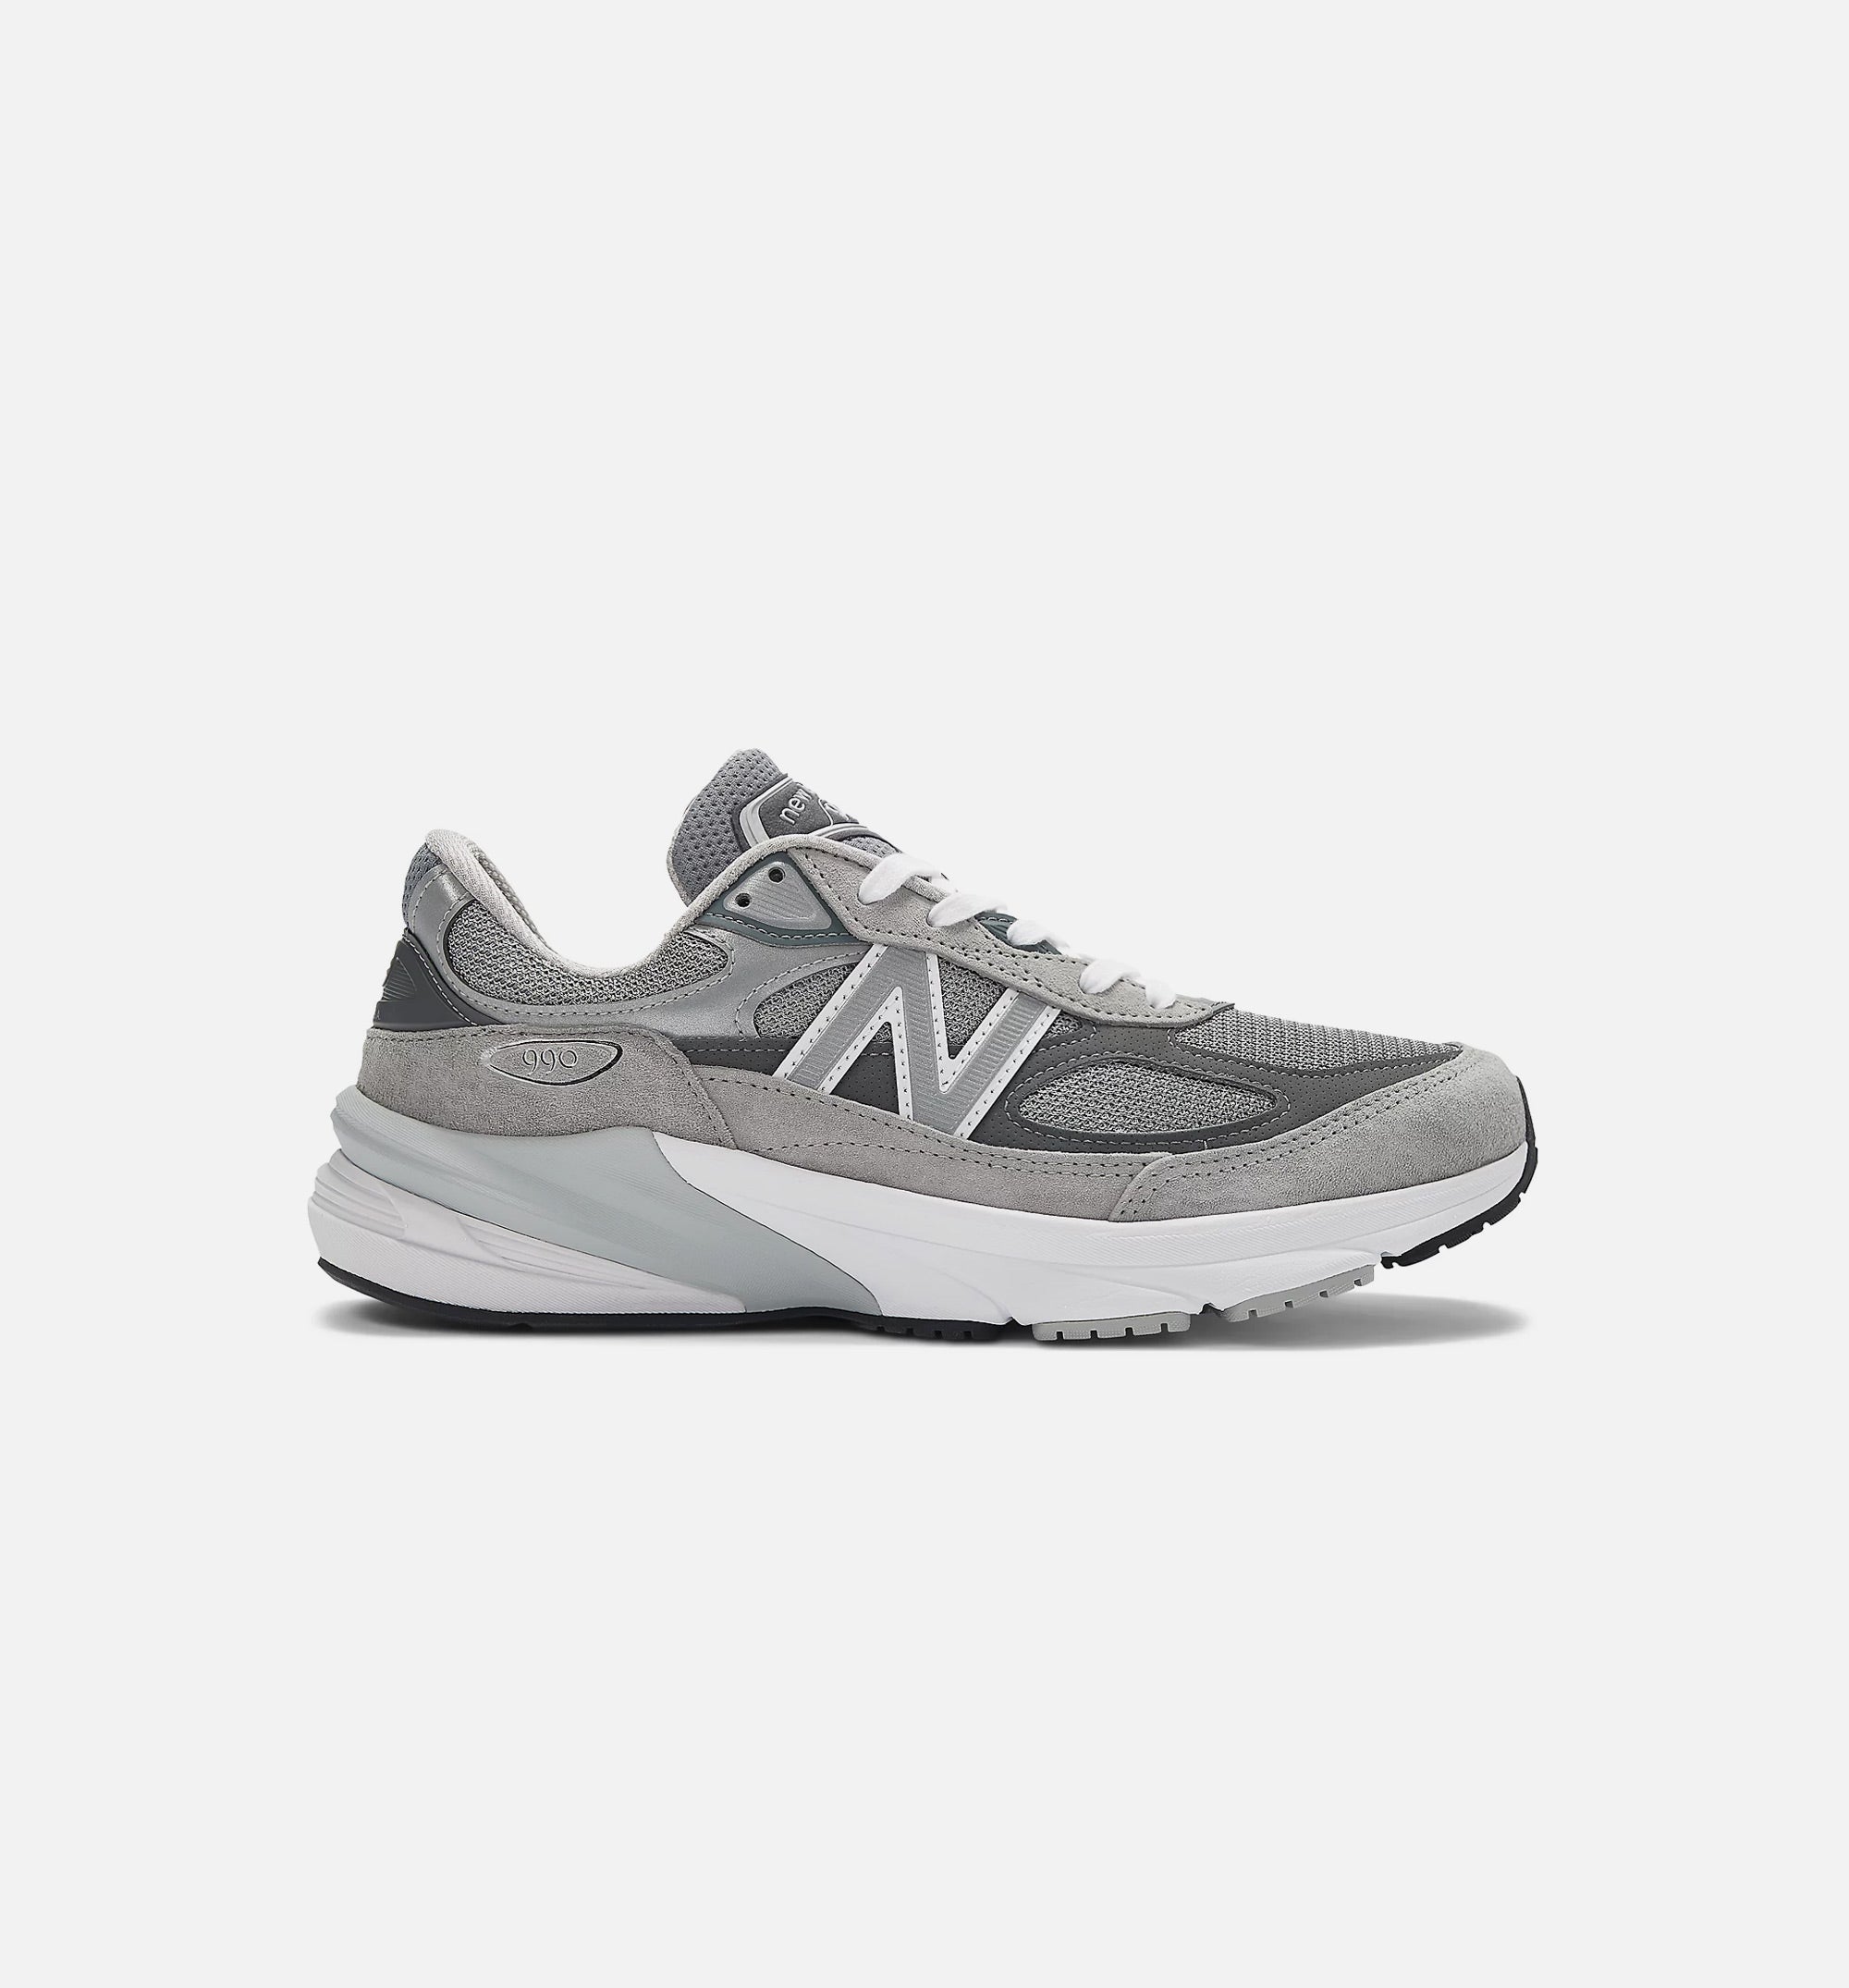 New Balance M990GL6 Made in USA 990v6 Mens Lifestyle Shoe - Grey ...